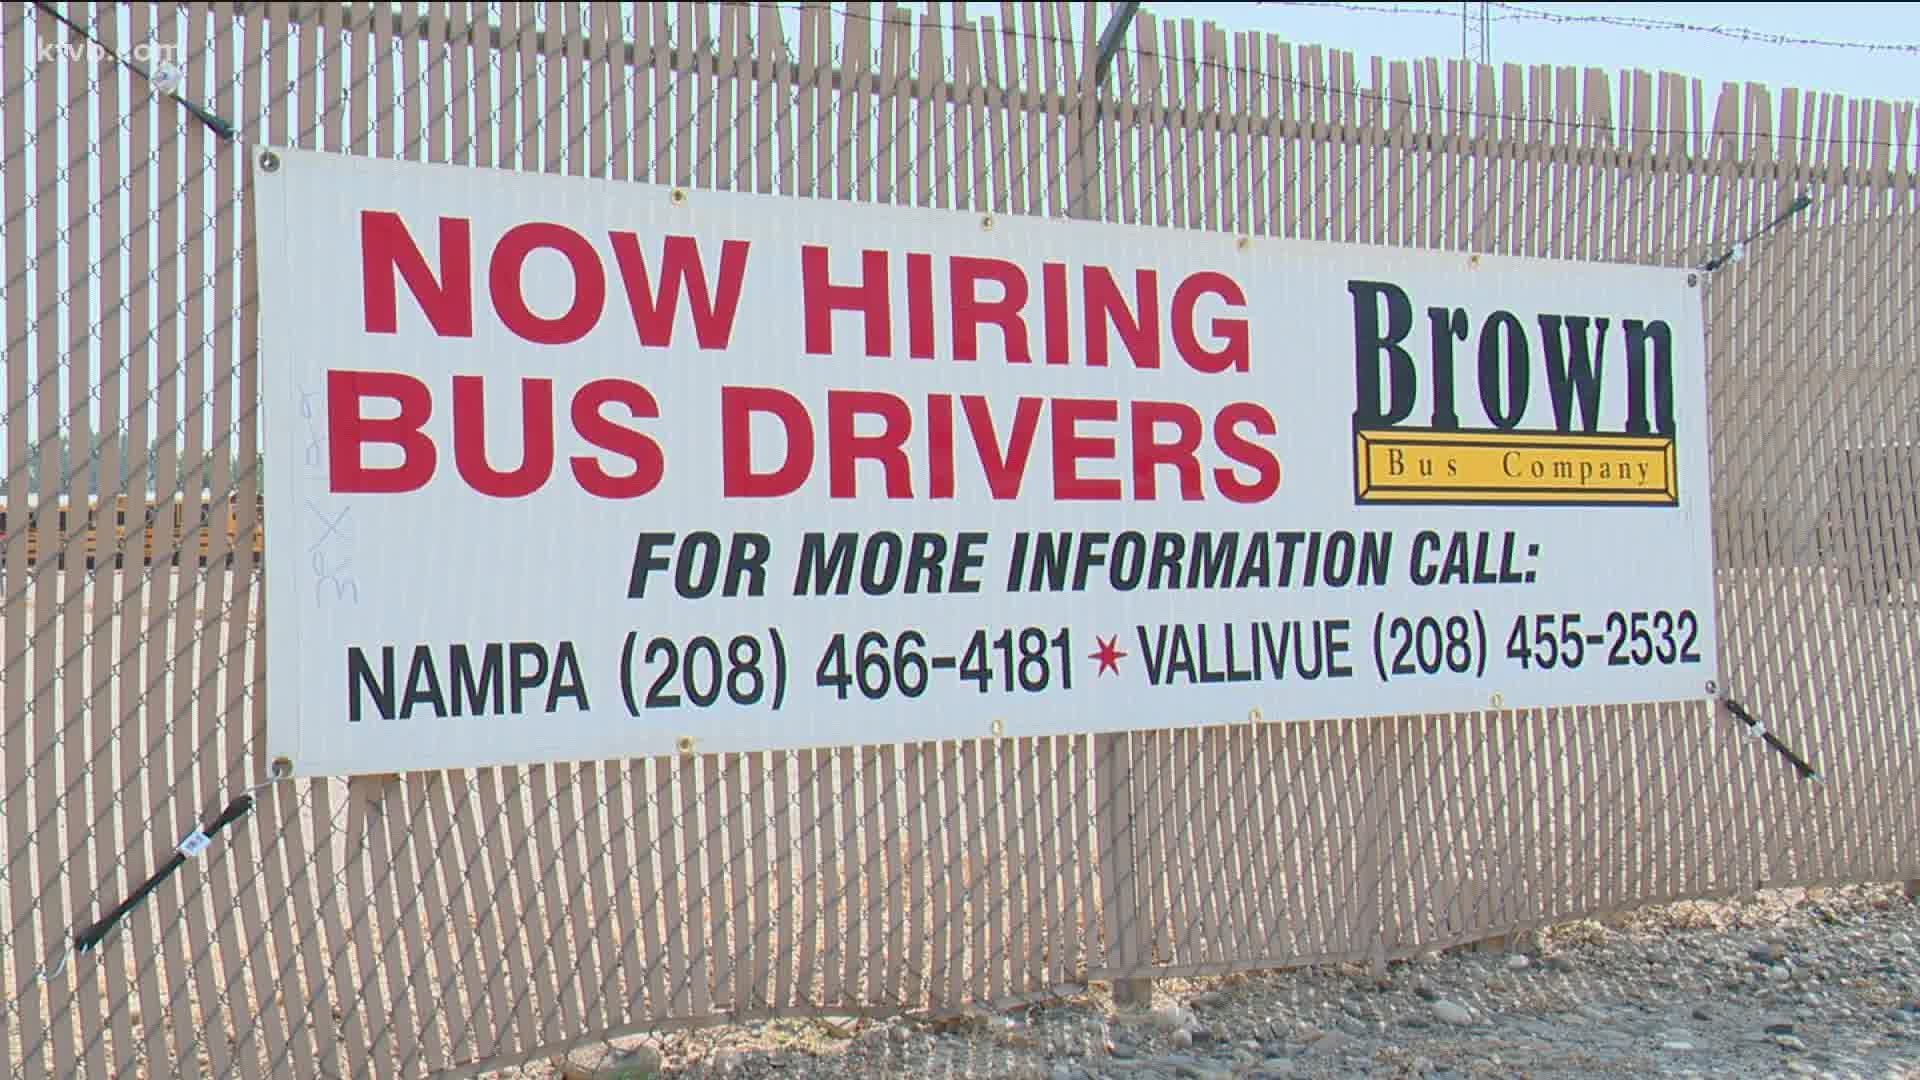 The company is looking to hire around 30 more bus drivers by the start of the school year.